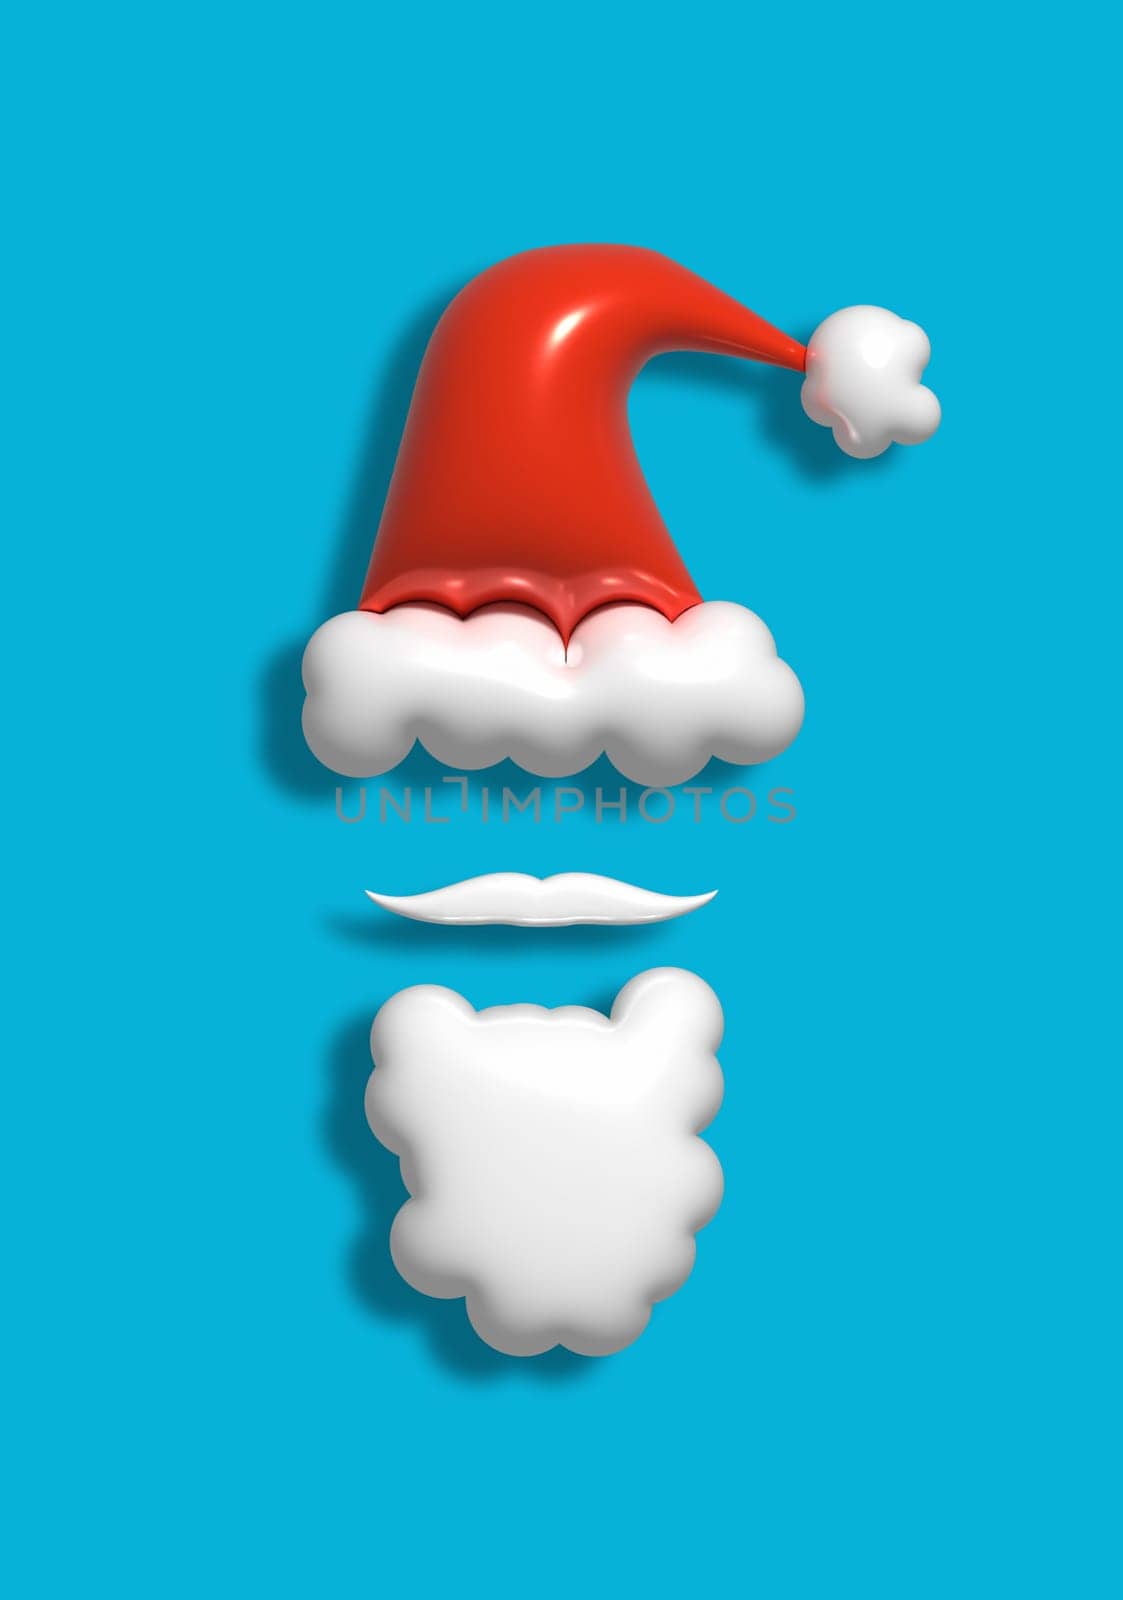 Red santa hat with white balabons and mustache on a blue background, 3D illustration.